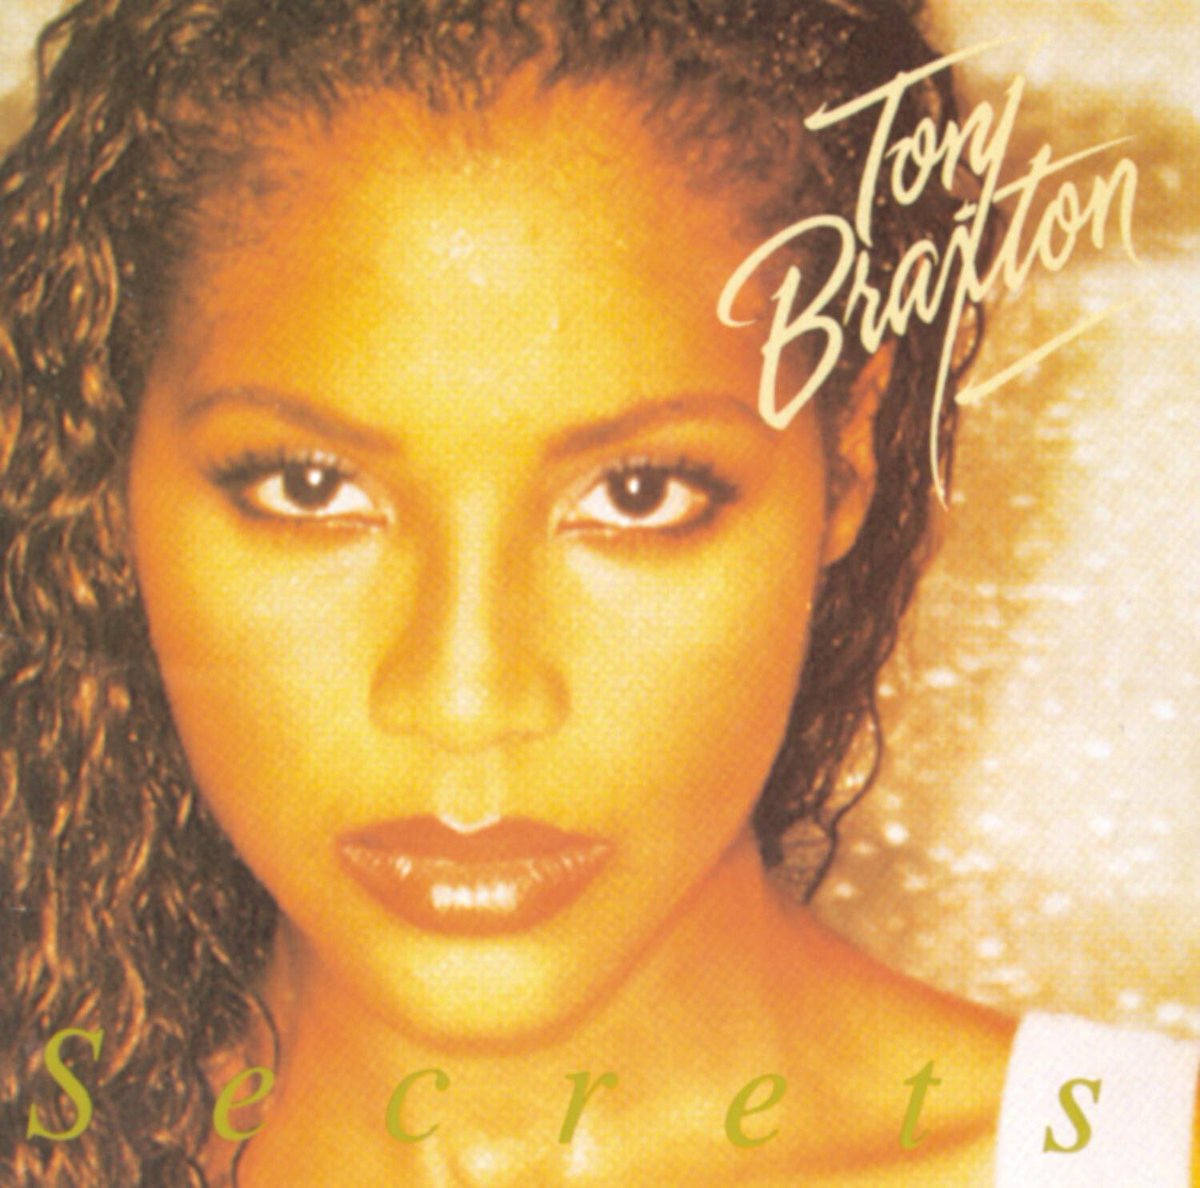 RT @LeModulicious: On this day in 1996 @tonibraxton released her iconic sophomore album #Secrets ???????? #20yrs later and still playing! https:/…